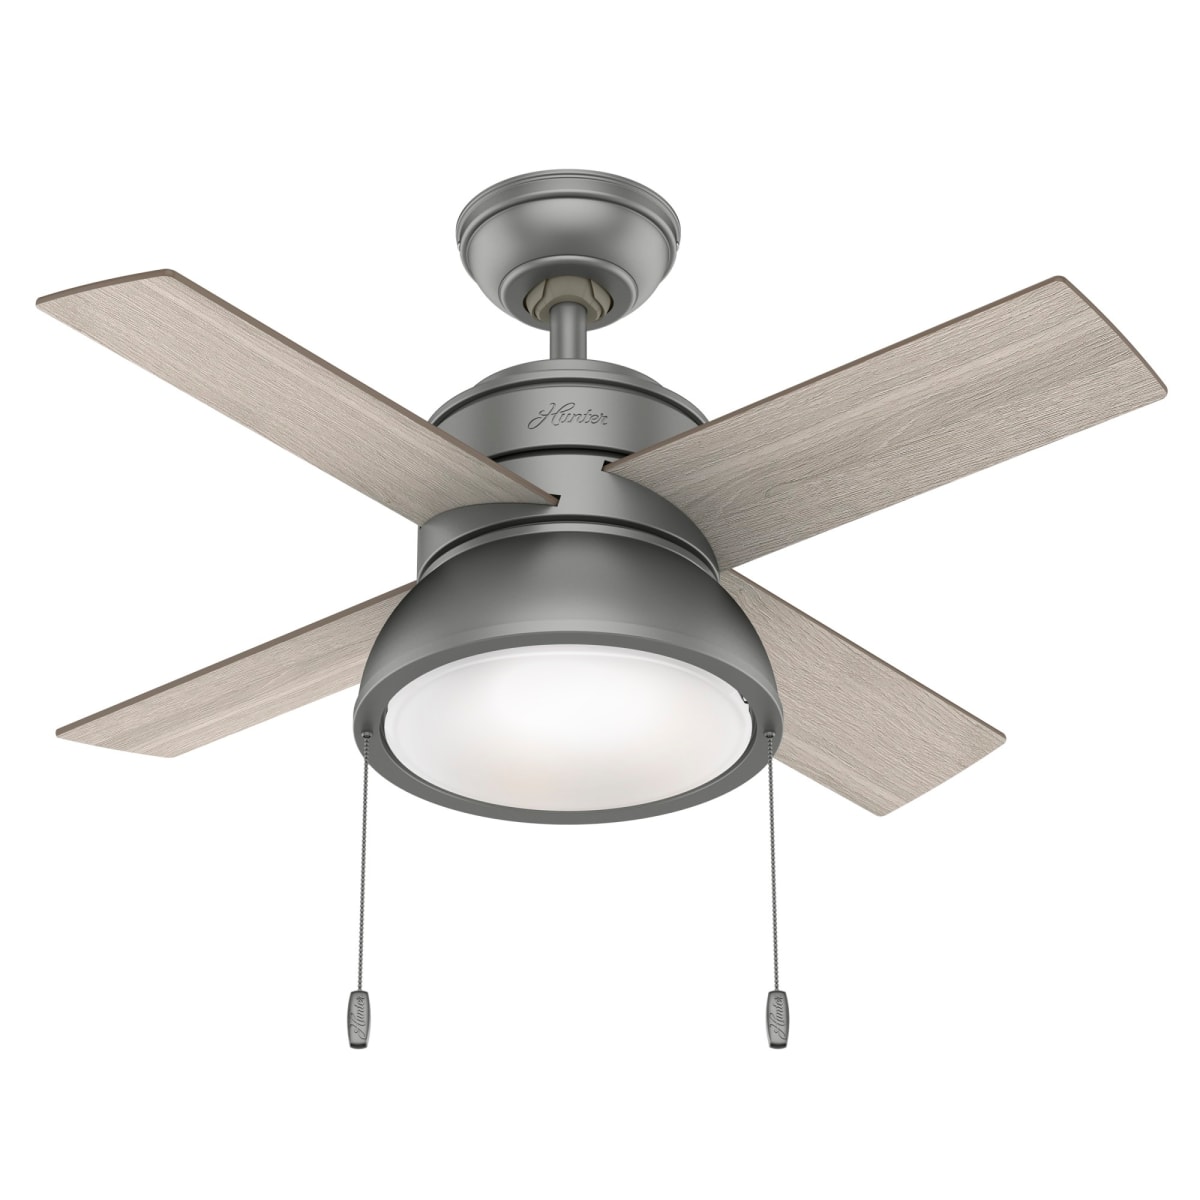 Tash 48 inch 4 Blade Ceiling Fan with Light in White Finish with Options 